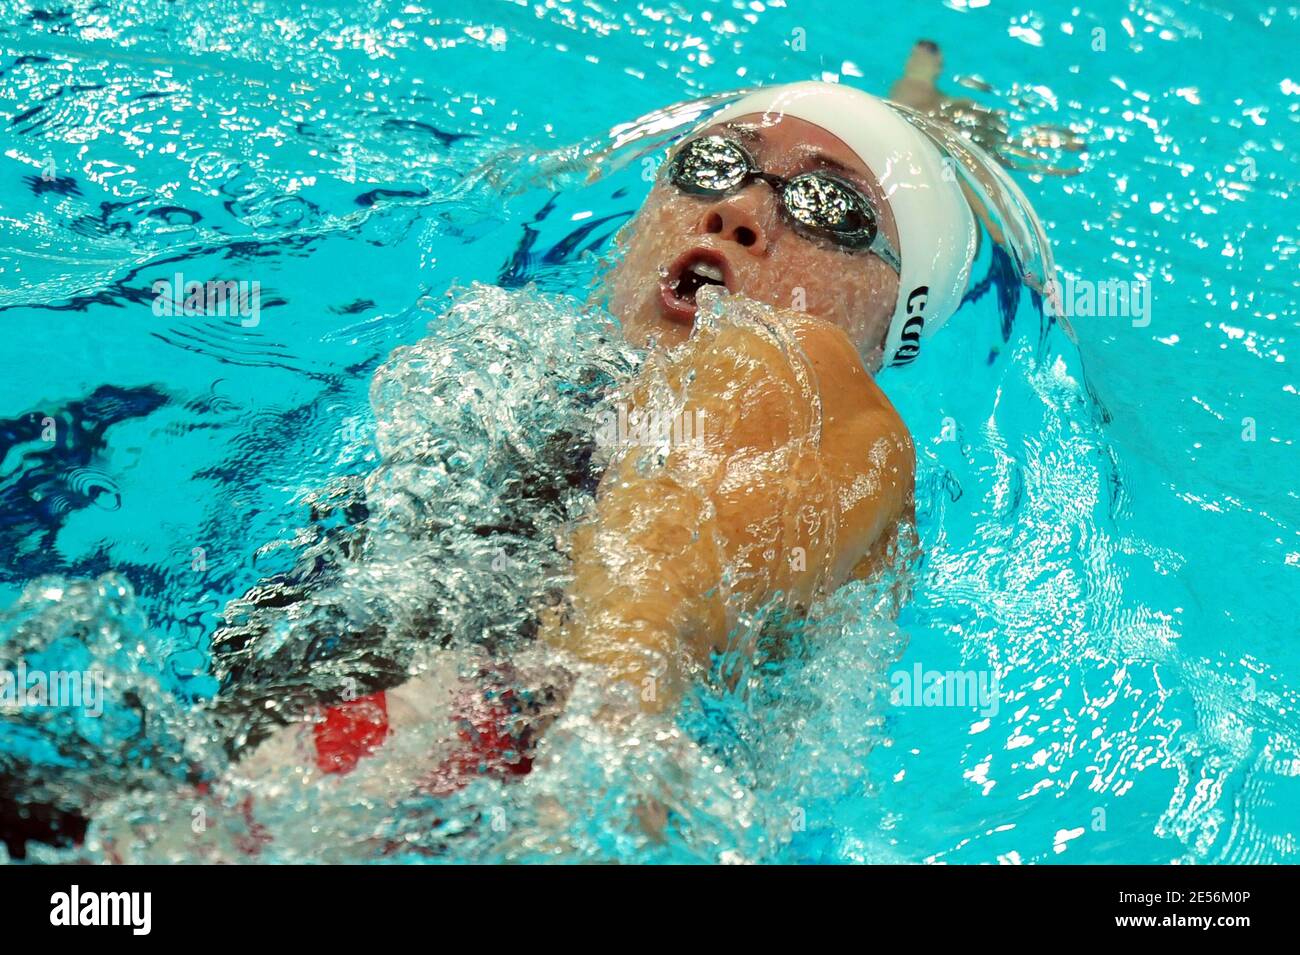 USA's Natalie Coughlin competes on women's 200 meters individual medley during the XXIX Olympic games day 3 at the Olympic National aquatic center in Beijing, China on August 11, 2008. Photo by Gouhier-Hahn-Nebinger/Cameleon/ABACAPRESS.COM Stock Photo